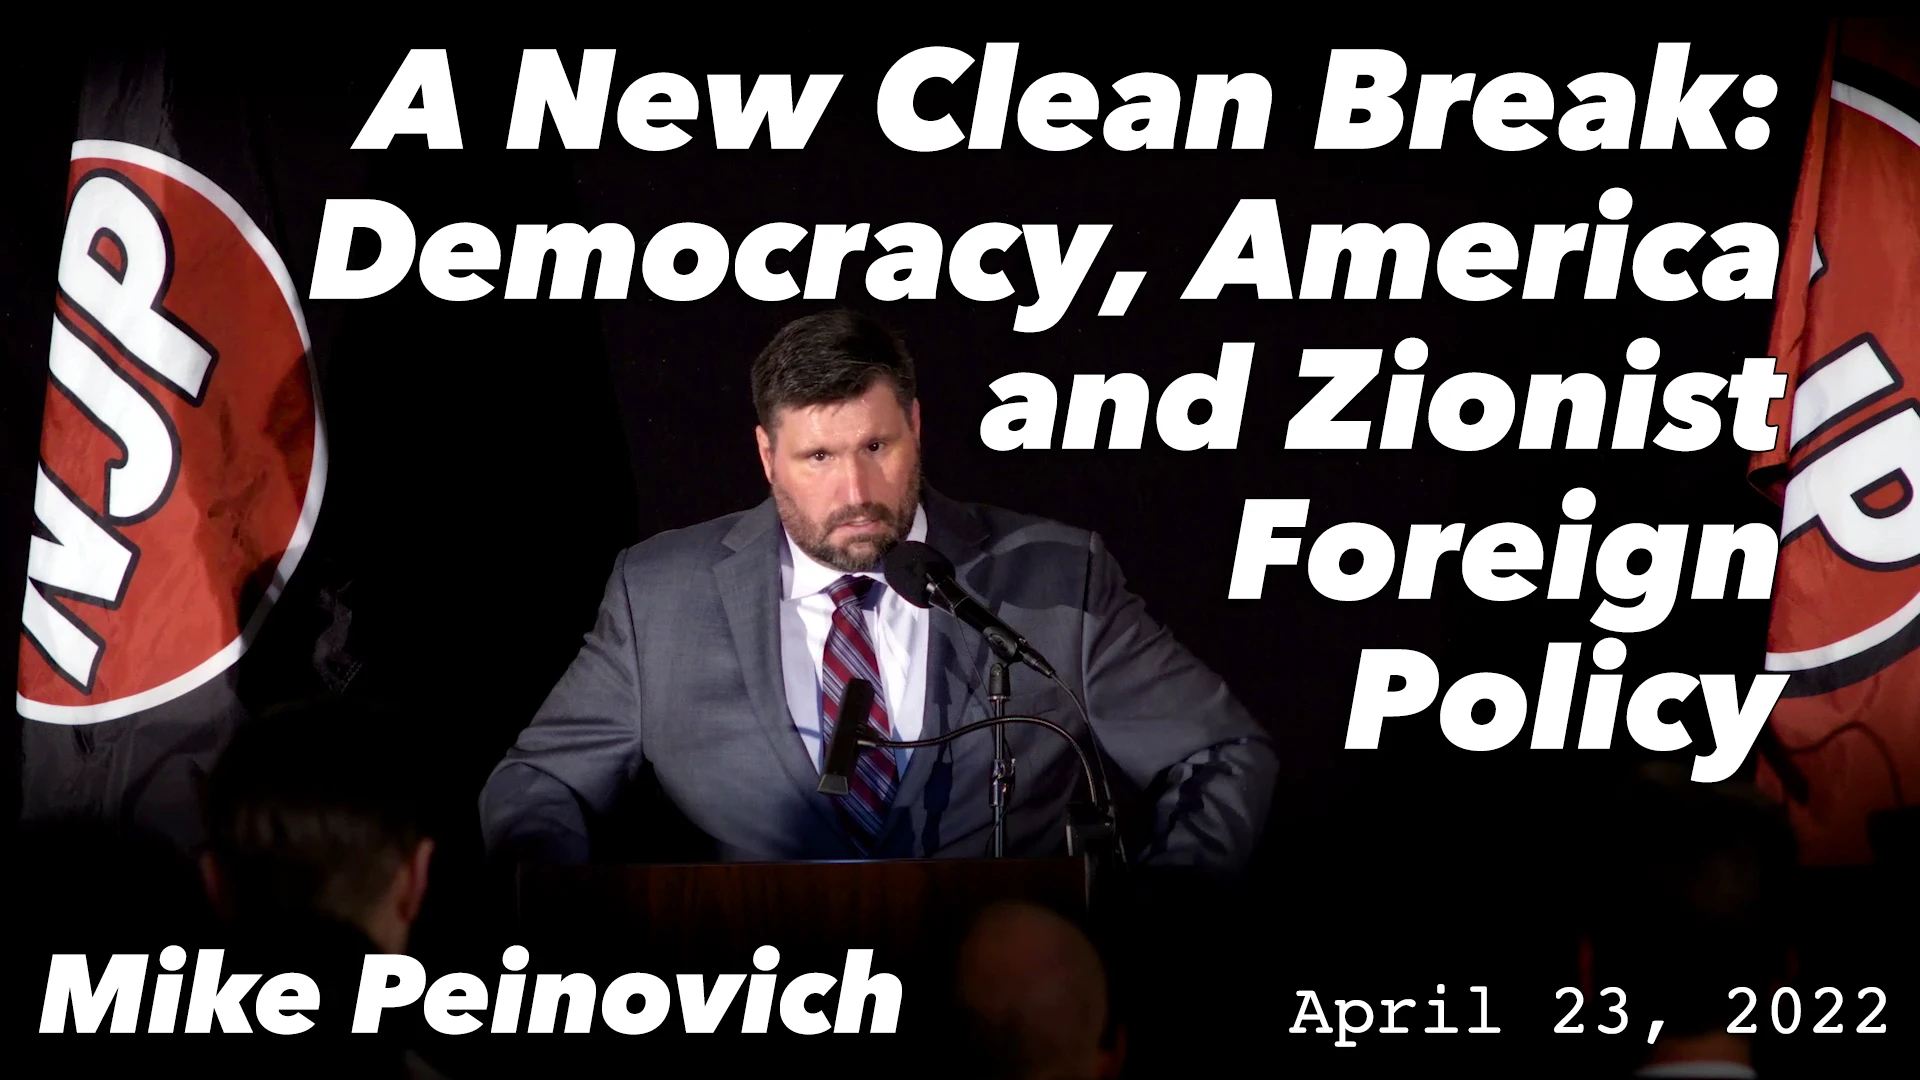 Mike Peinovich - A New Clean Break: Democracy, America and Zionist Foreign Policy